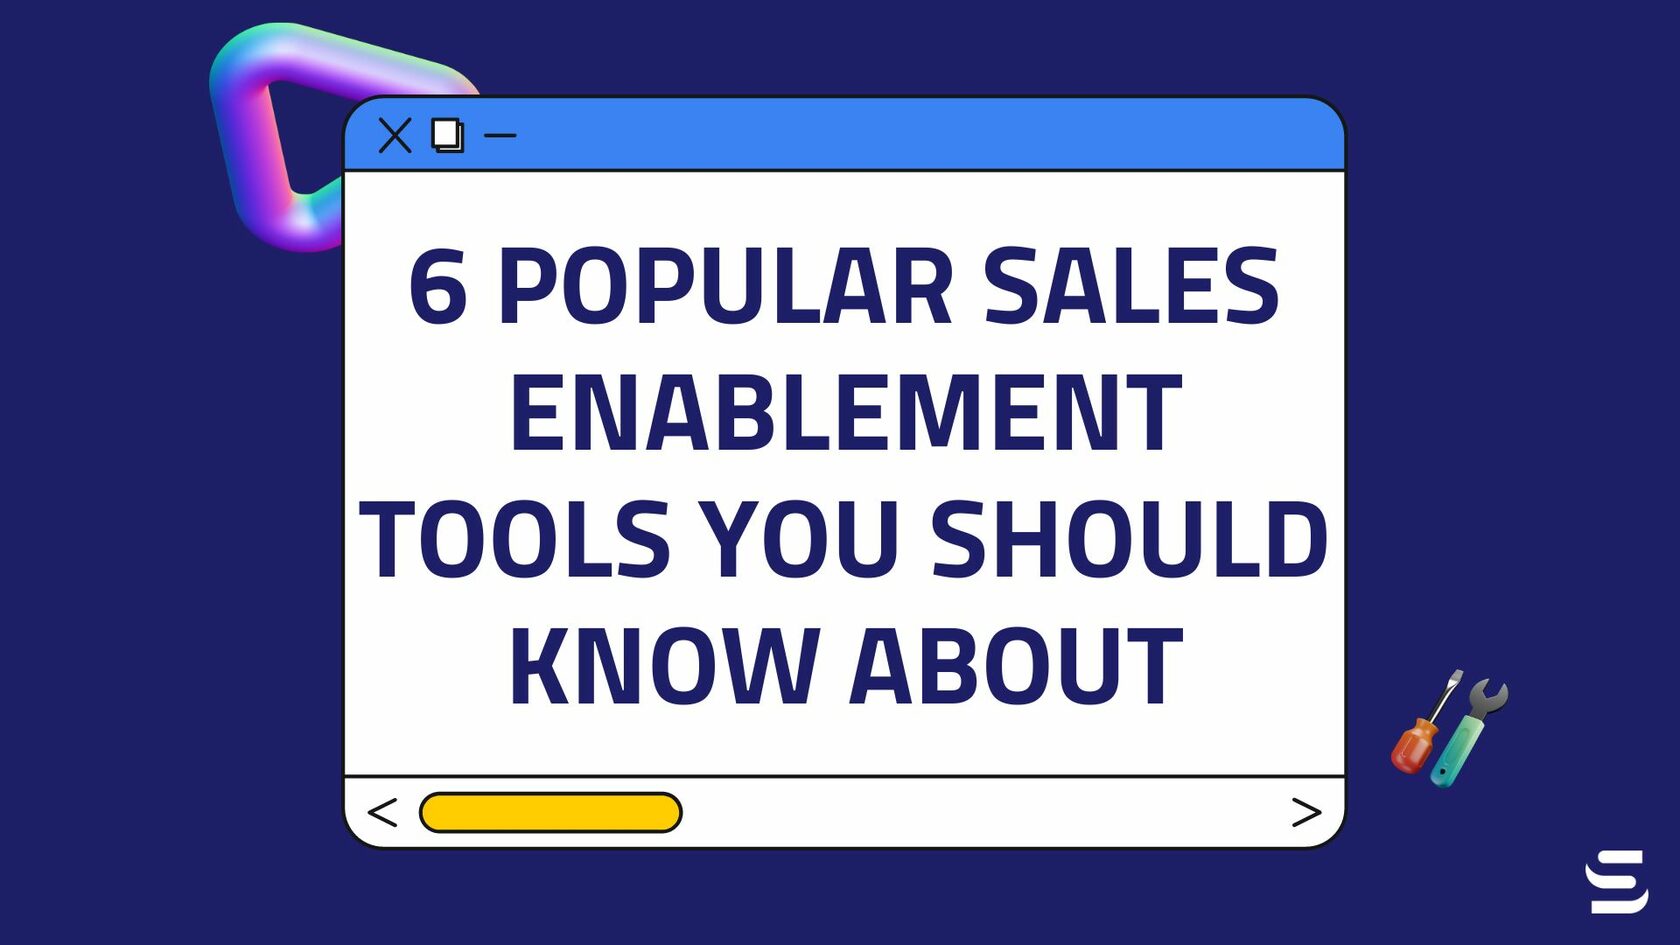 6 Popular Sales Enablement Tools You Should Know About